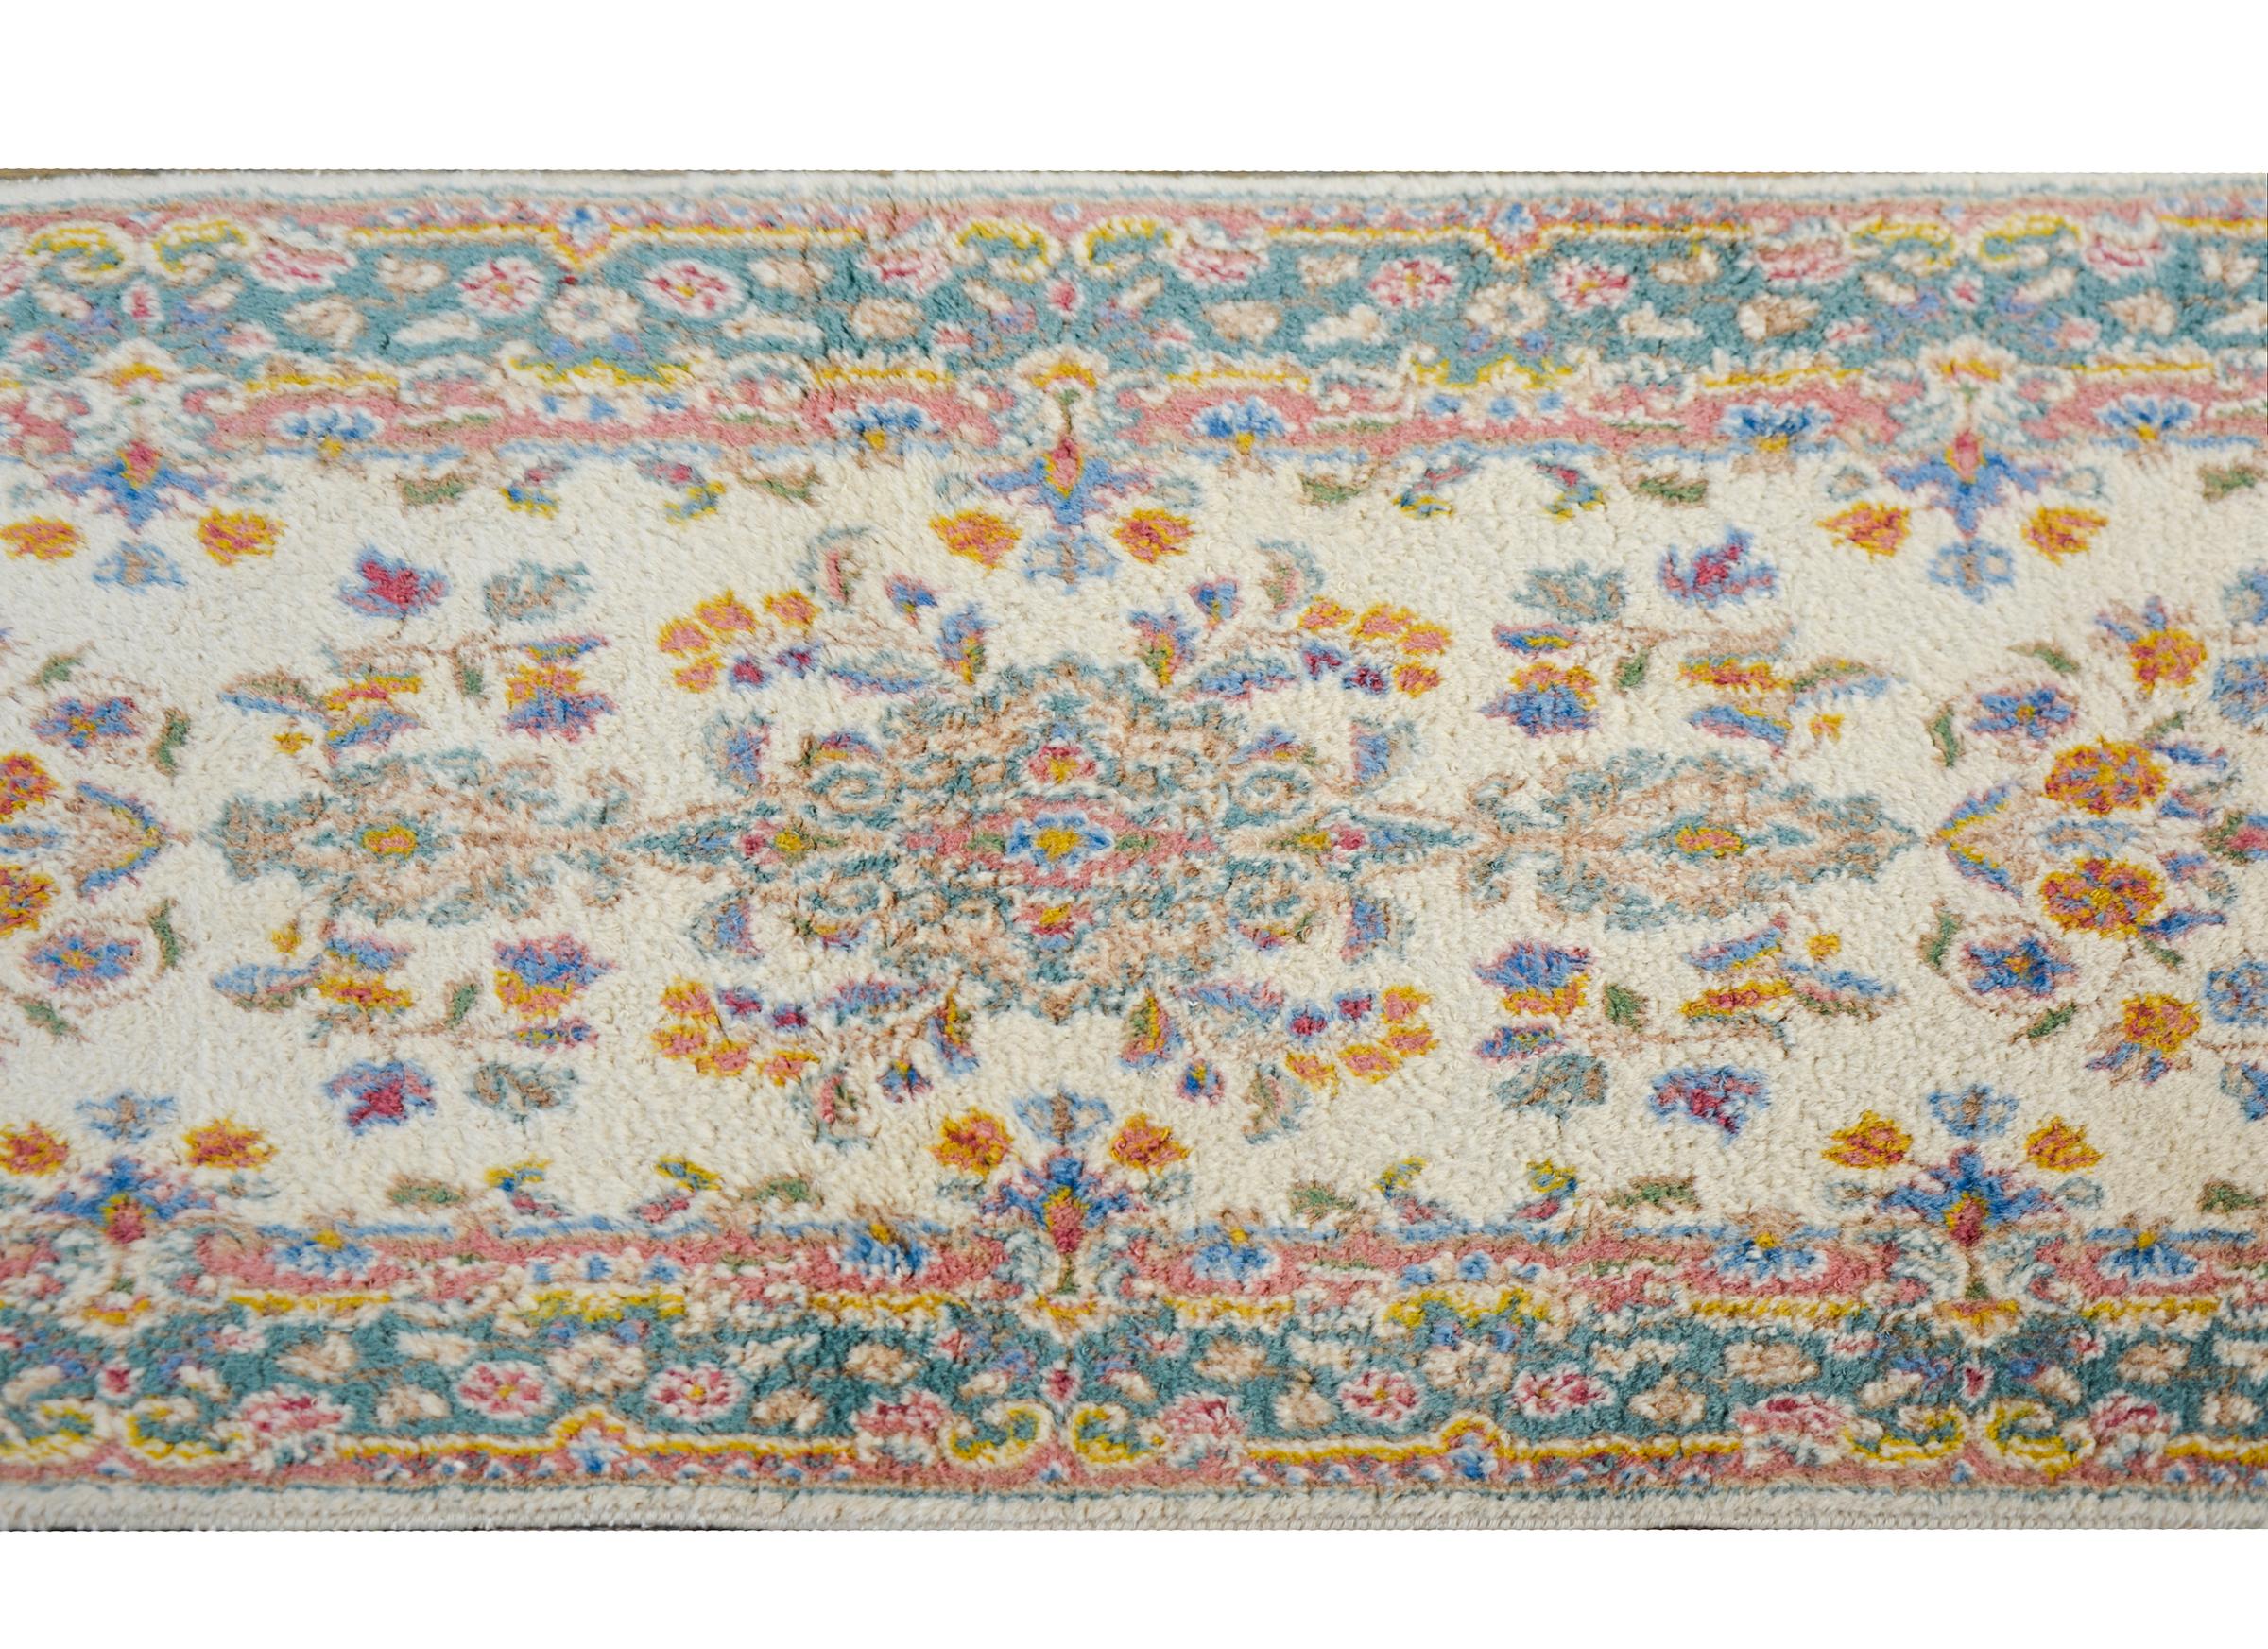 Early 20th Century Persian Kirman Runner In Good Condition For Sale In Chicago, IL